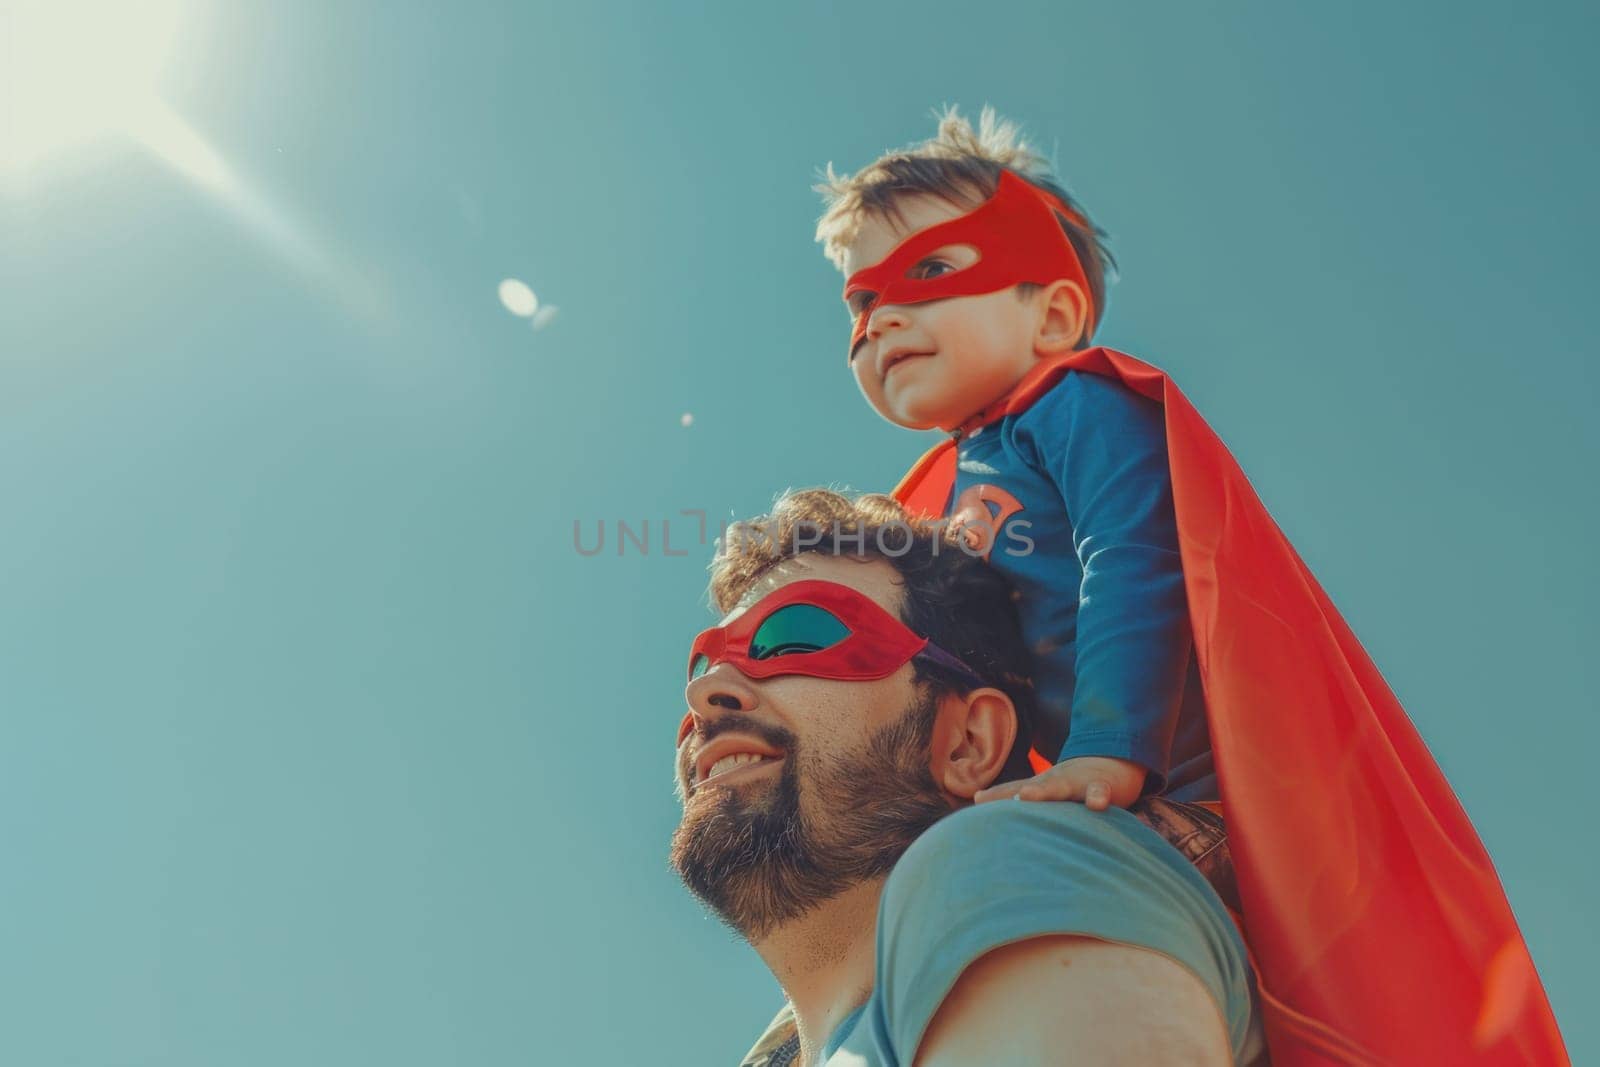 Father and son superheroes enjoying a sunny day in front of blue sky, showing strength and unity